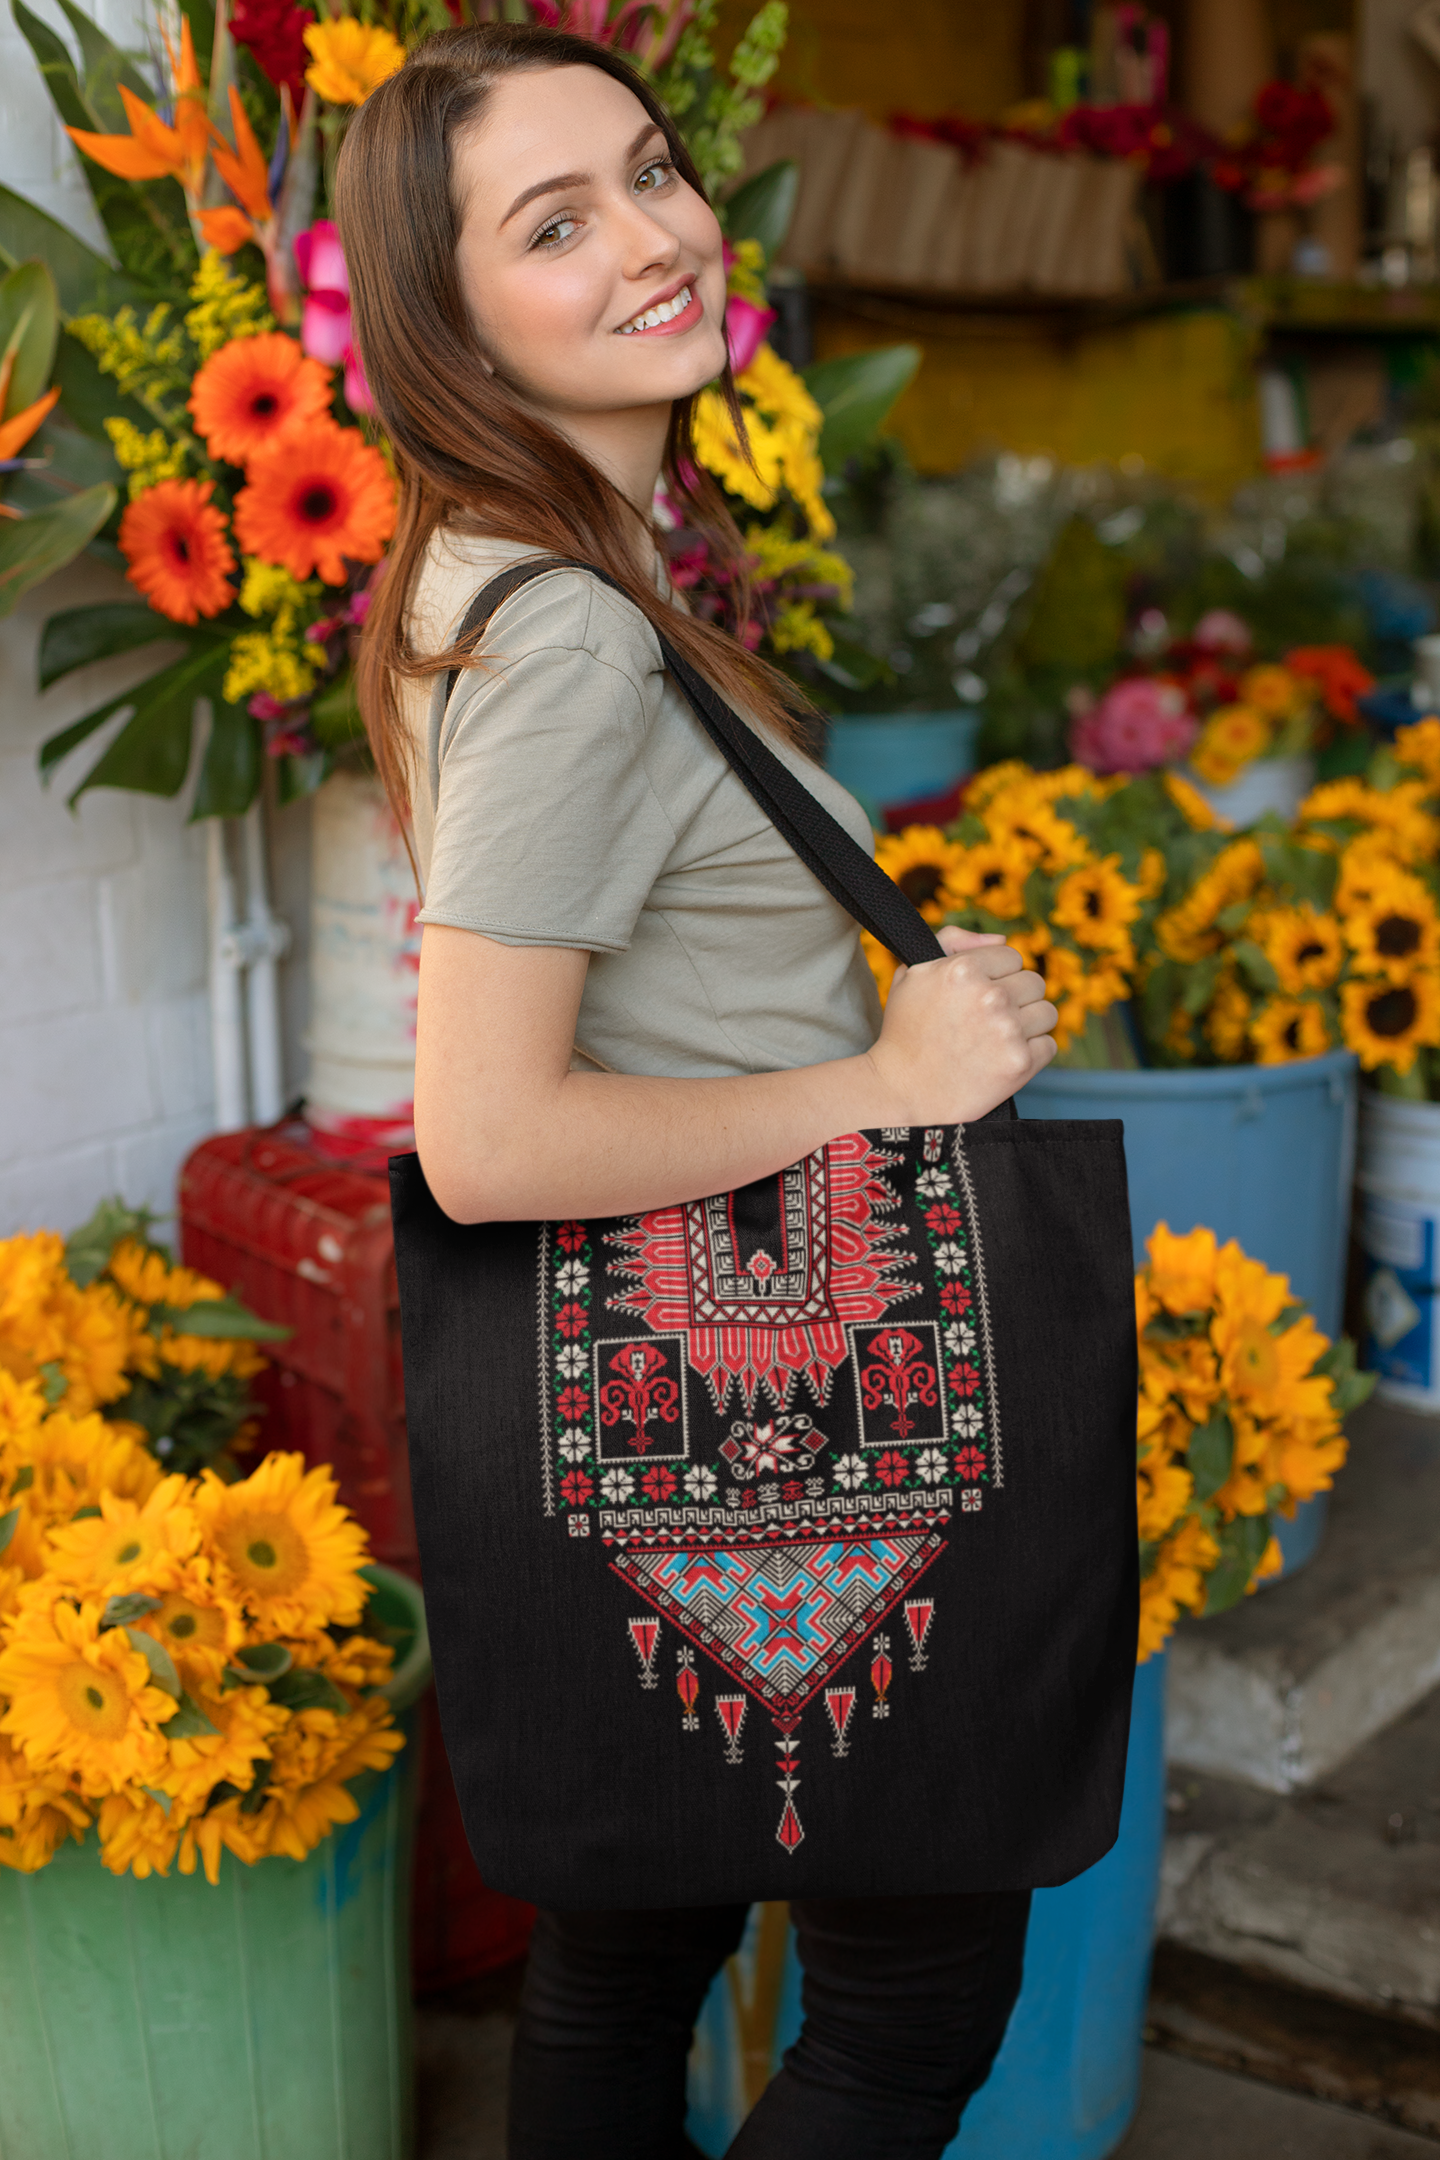 Palestinian Thobe Tatreez Embroidery Stitch Design Print Tote Bag Available in S-L Free Palestine